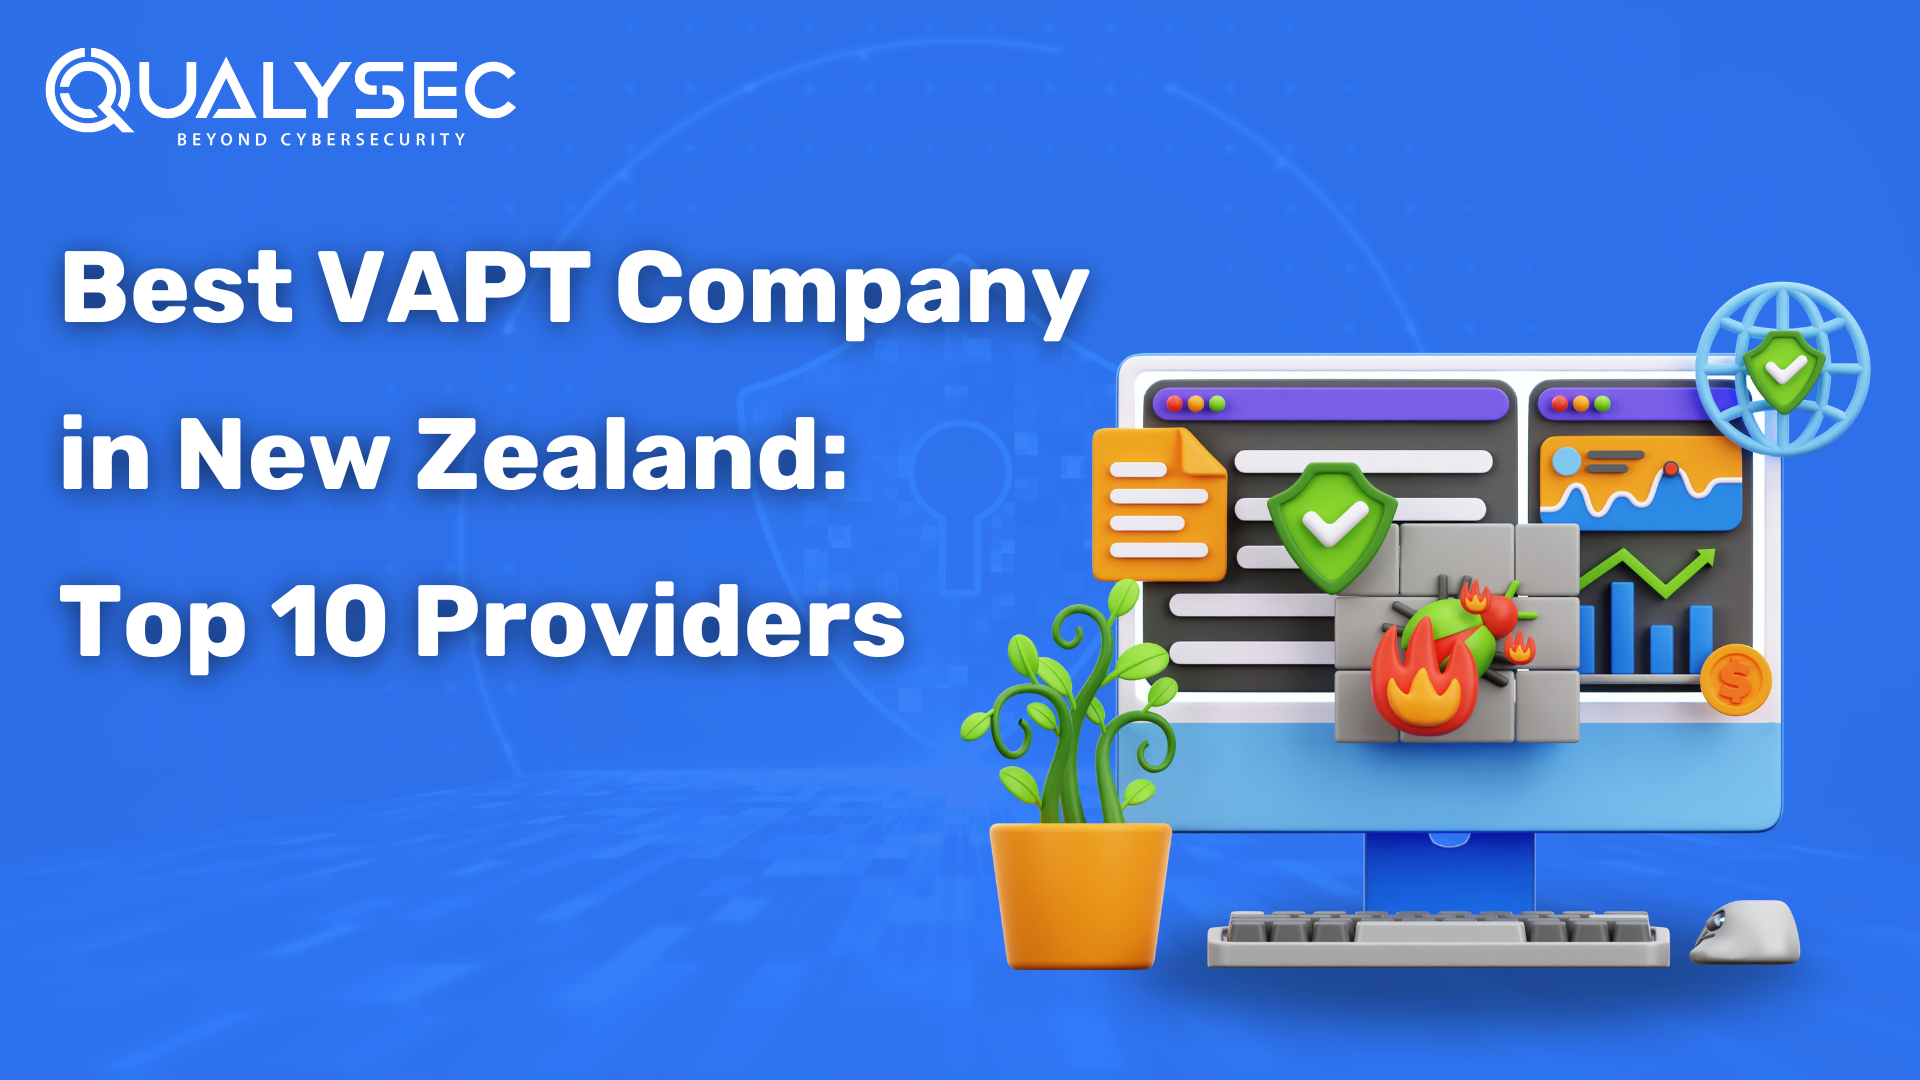 Best VAPT Company in New Zealand: Top 10 Providers